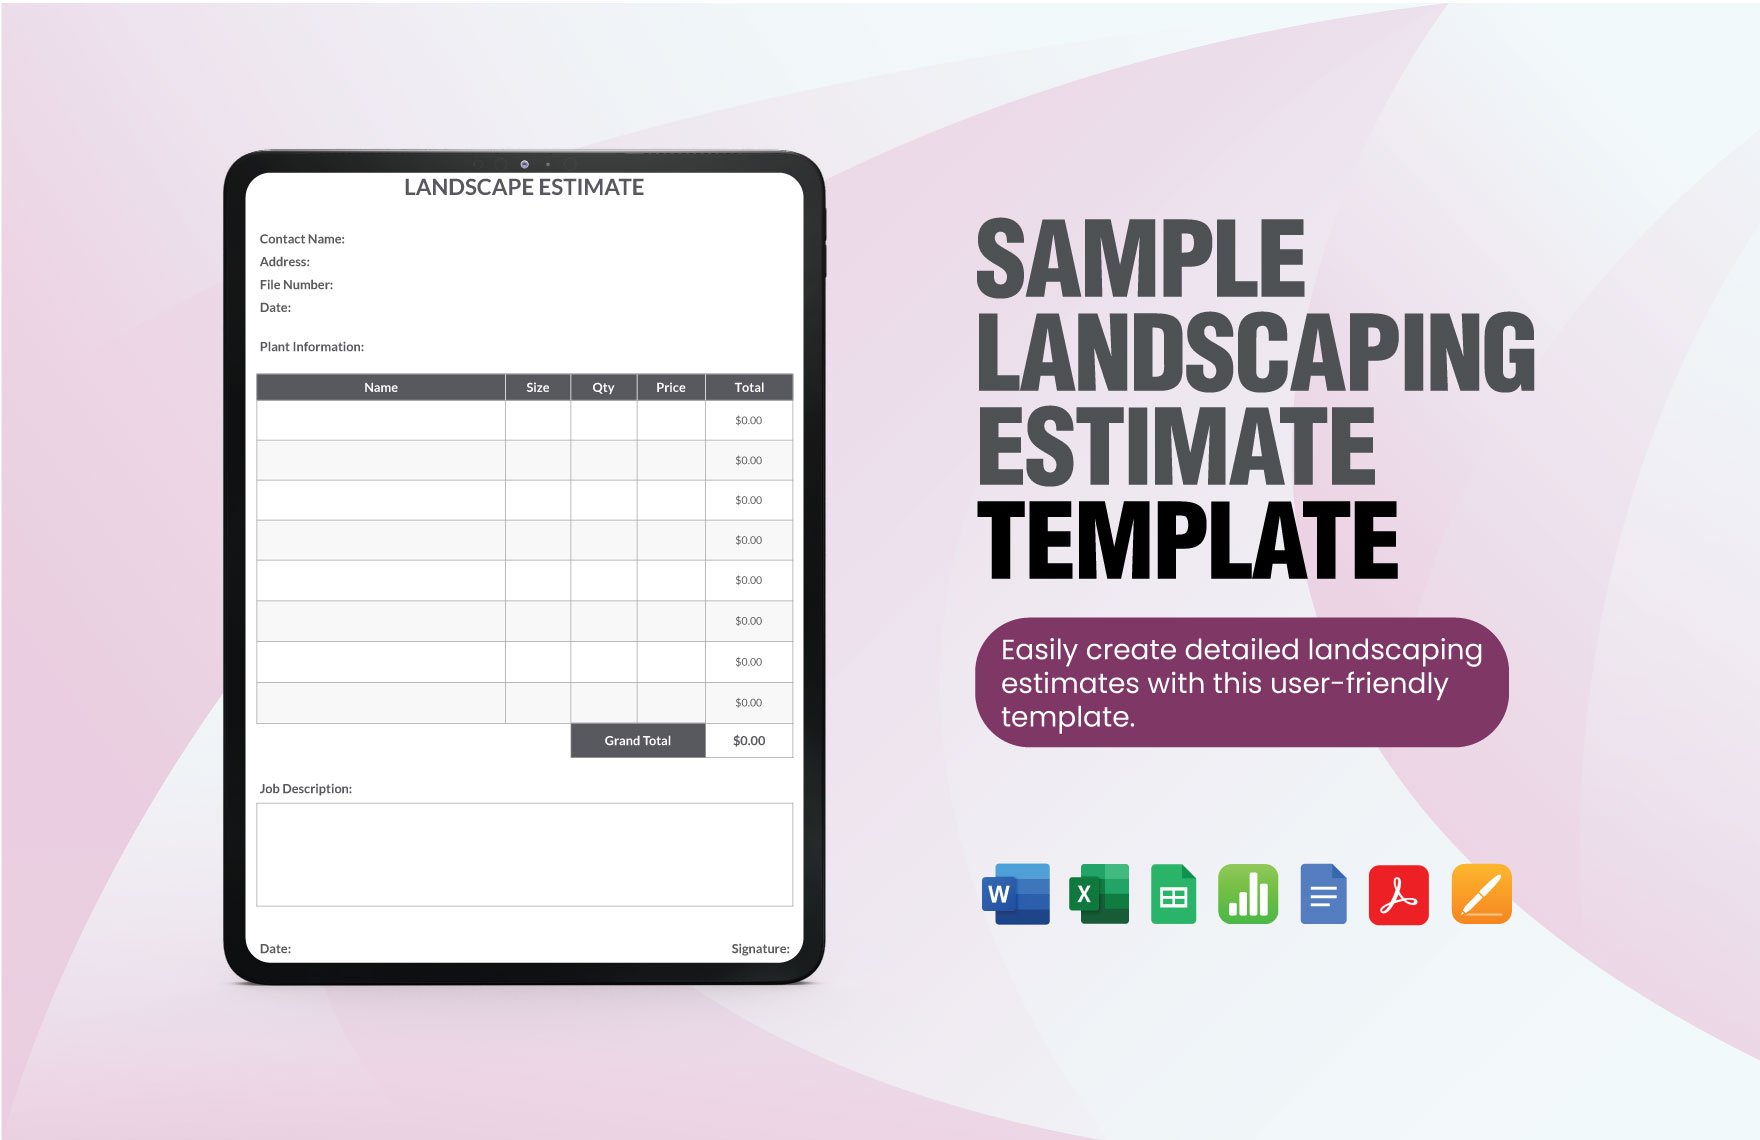 Sample Landscaping Estimate Template in Word, Google Docs, Excel, PDF, Google Sheets, Apple Pages, Apple Numbers